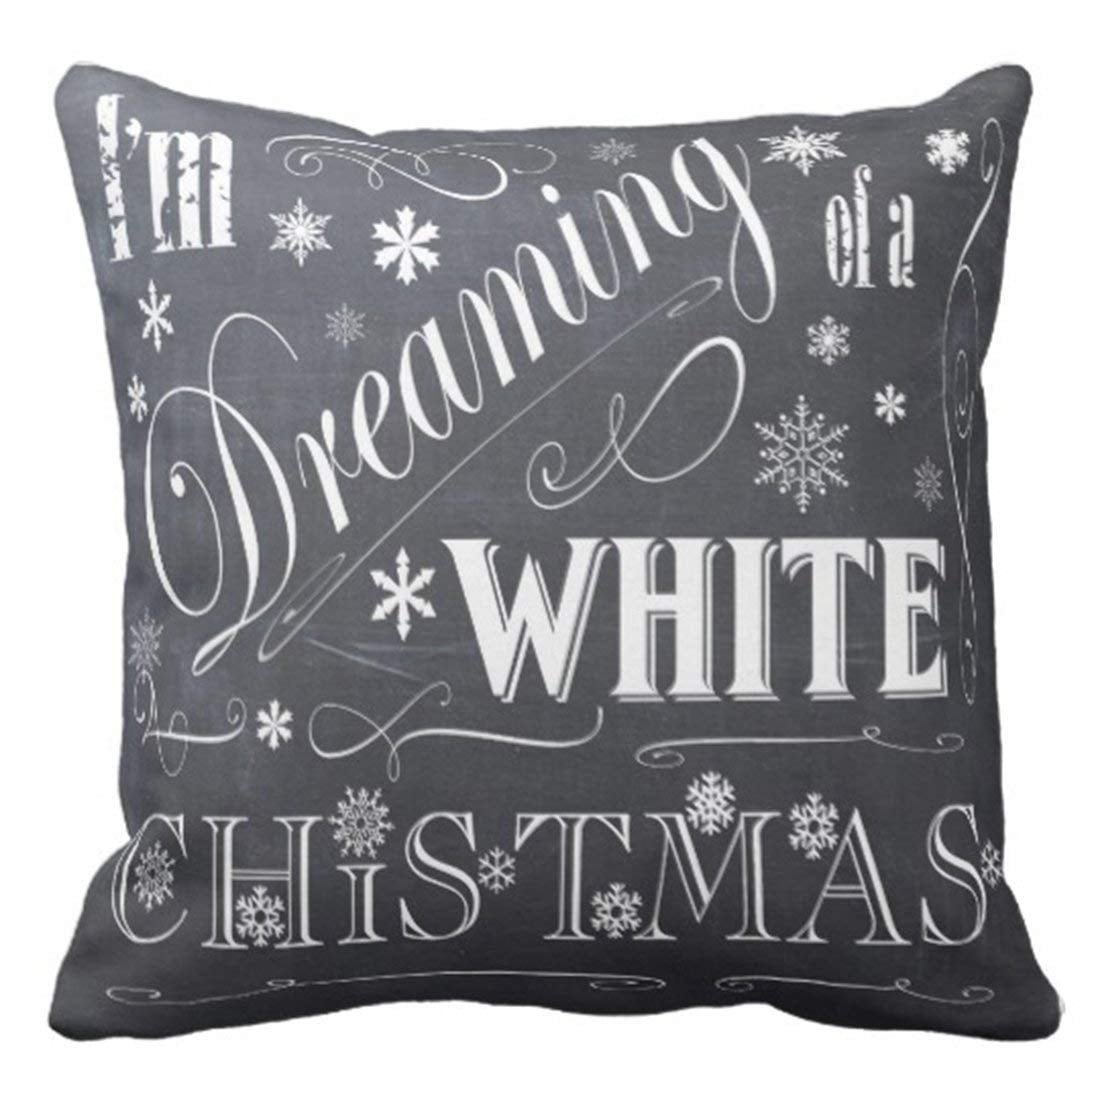 BPBOP Holiday Chalkboard White Christmas Pillowcase Throw Pillow Cover 20x20 inches Walmart